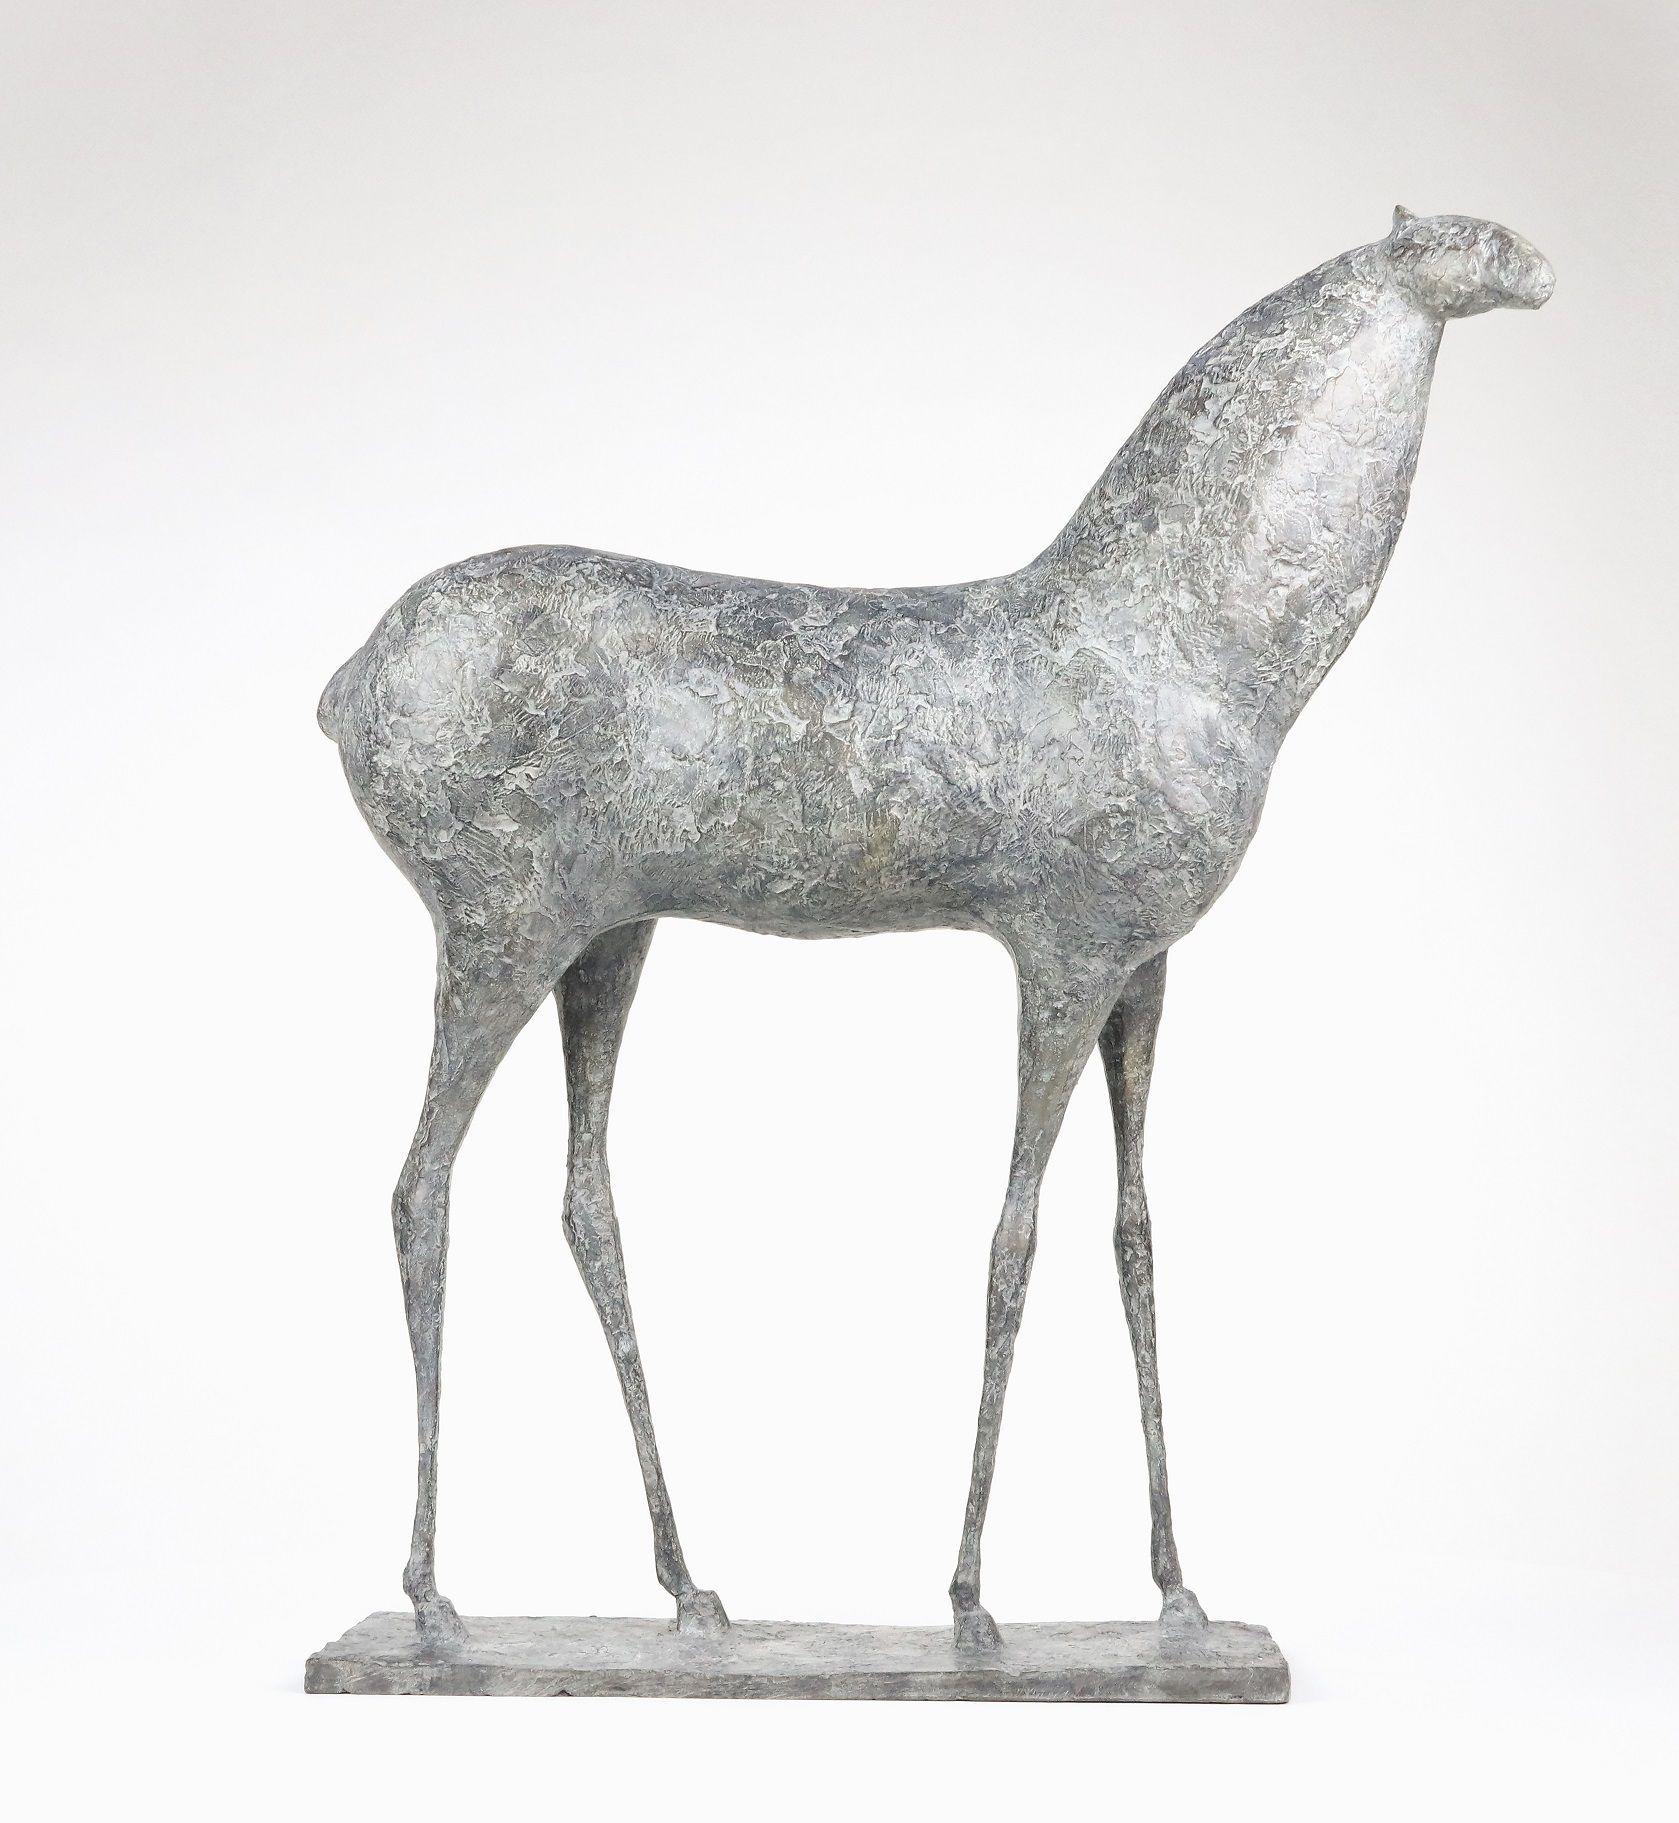 Horse XIV is a bronze sculpture by French contemporary artist Pierre Yermia, dimensions are 60 × 55 × 16 cm (23.6 × 21.7 × 6.3 in). 
The sculpture is signed and numbered, it is part of a limited edition of 8 editions + 4 artist’s proofs, and comes